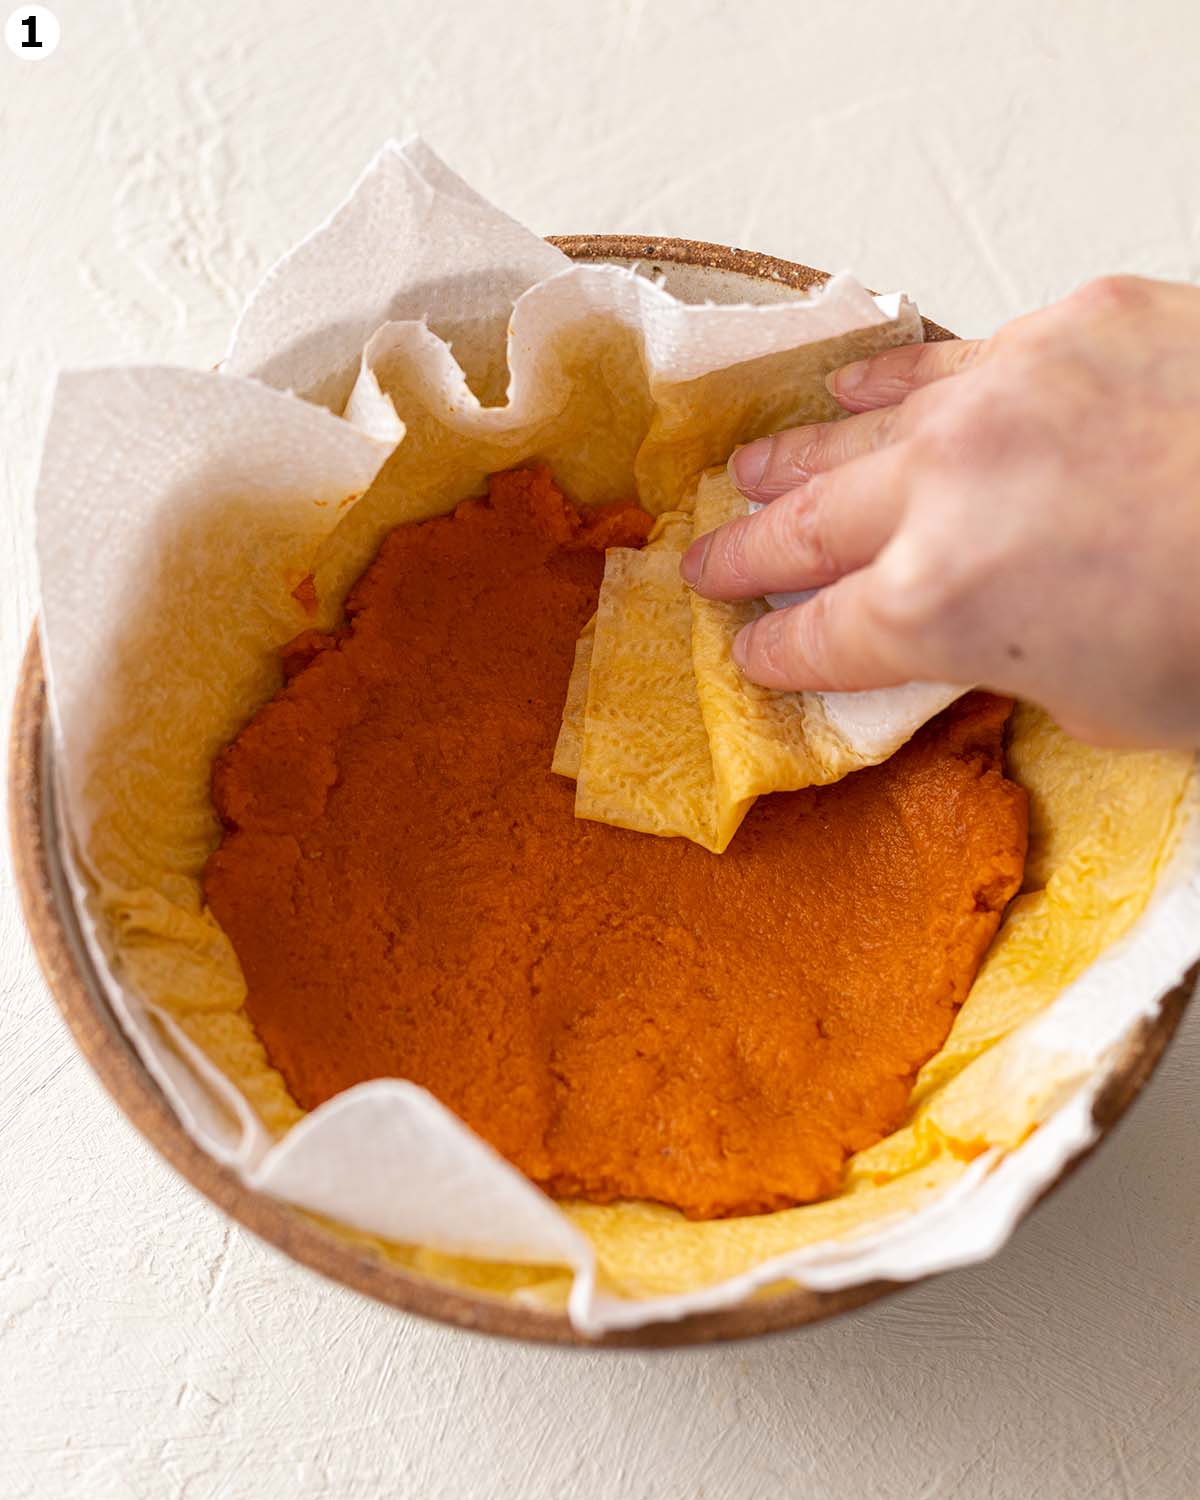 Pumpkin puree on paper towels in bowl. Hand is blotting pumpkin with another paper towel.